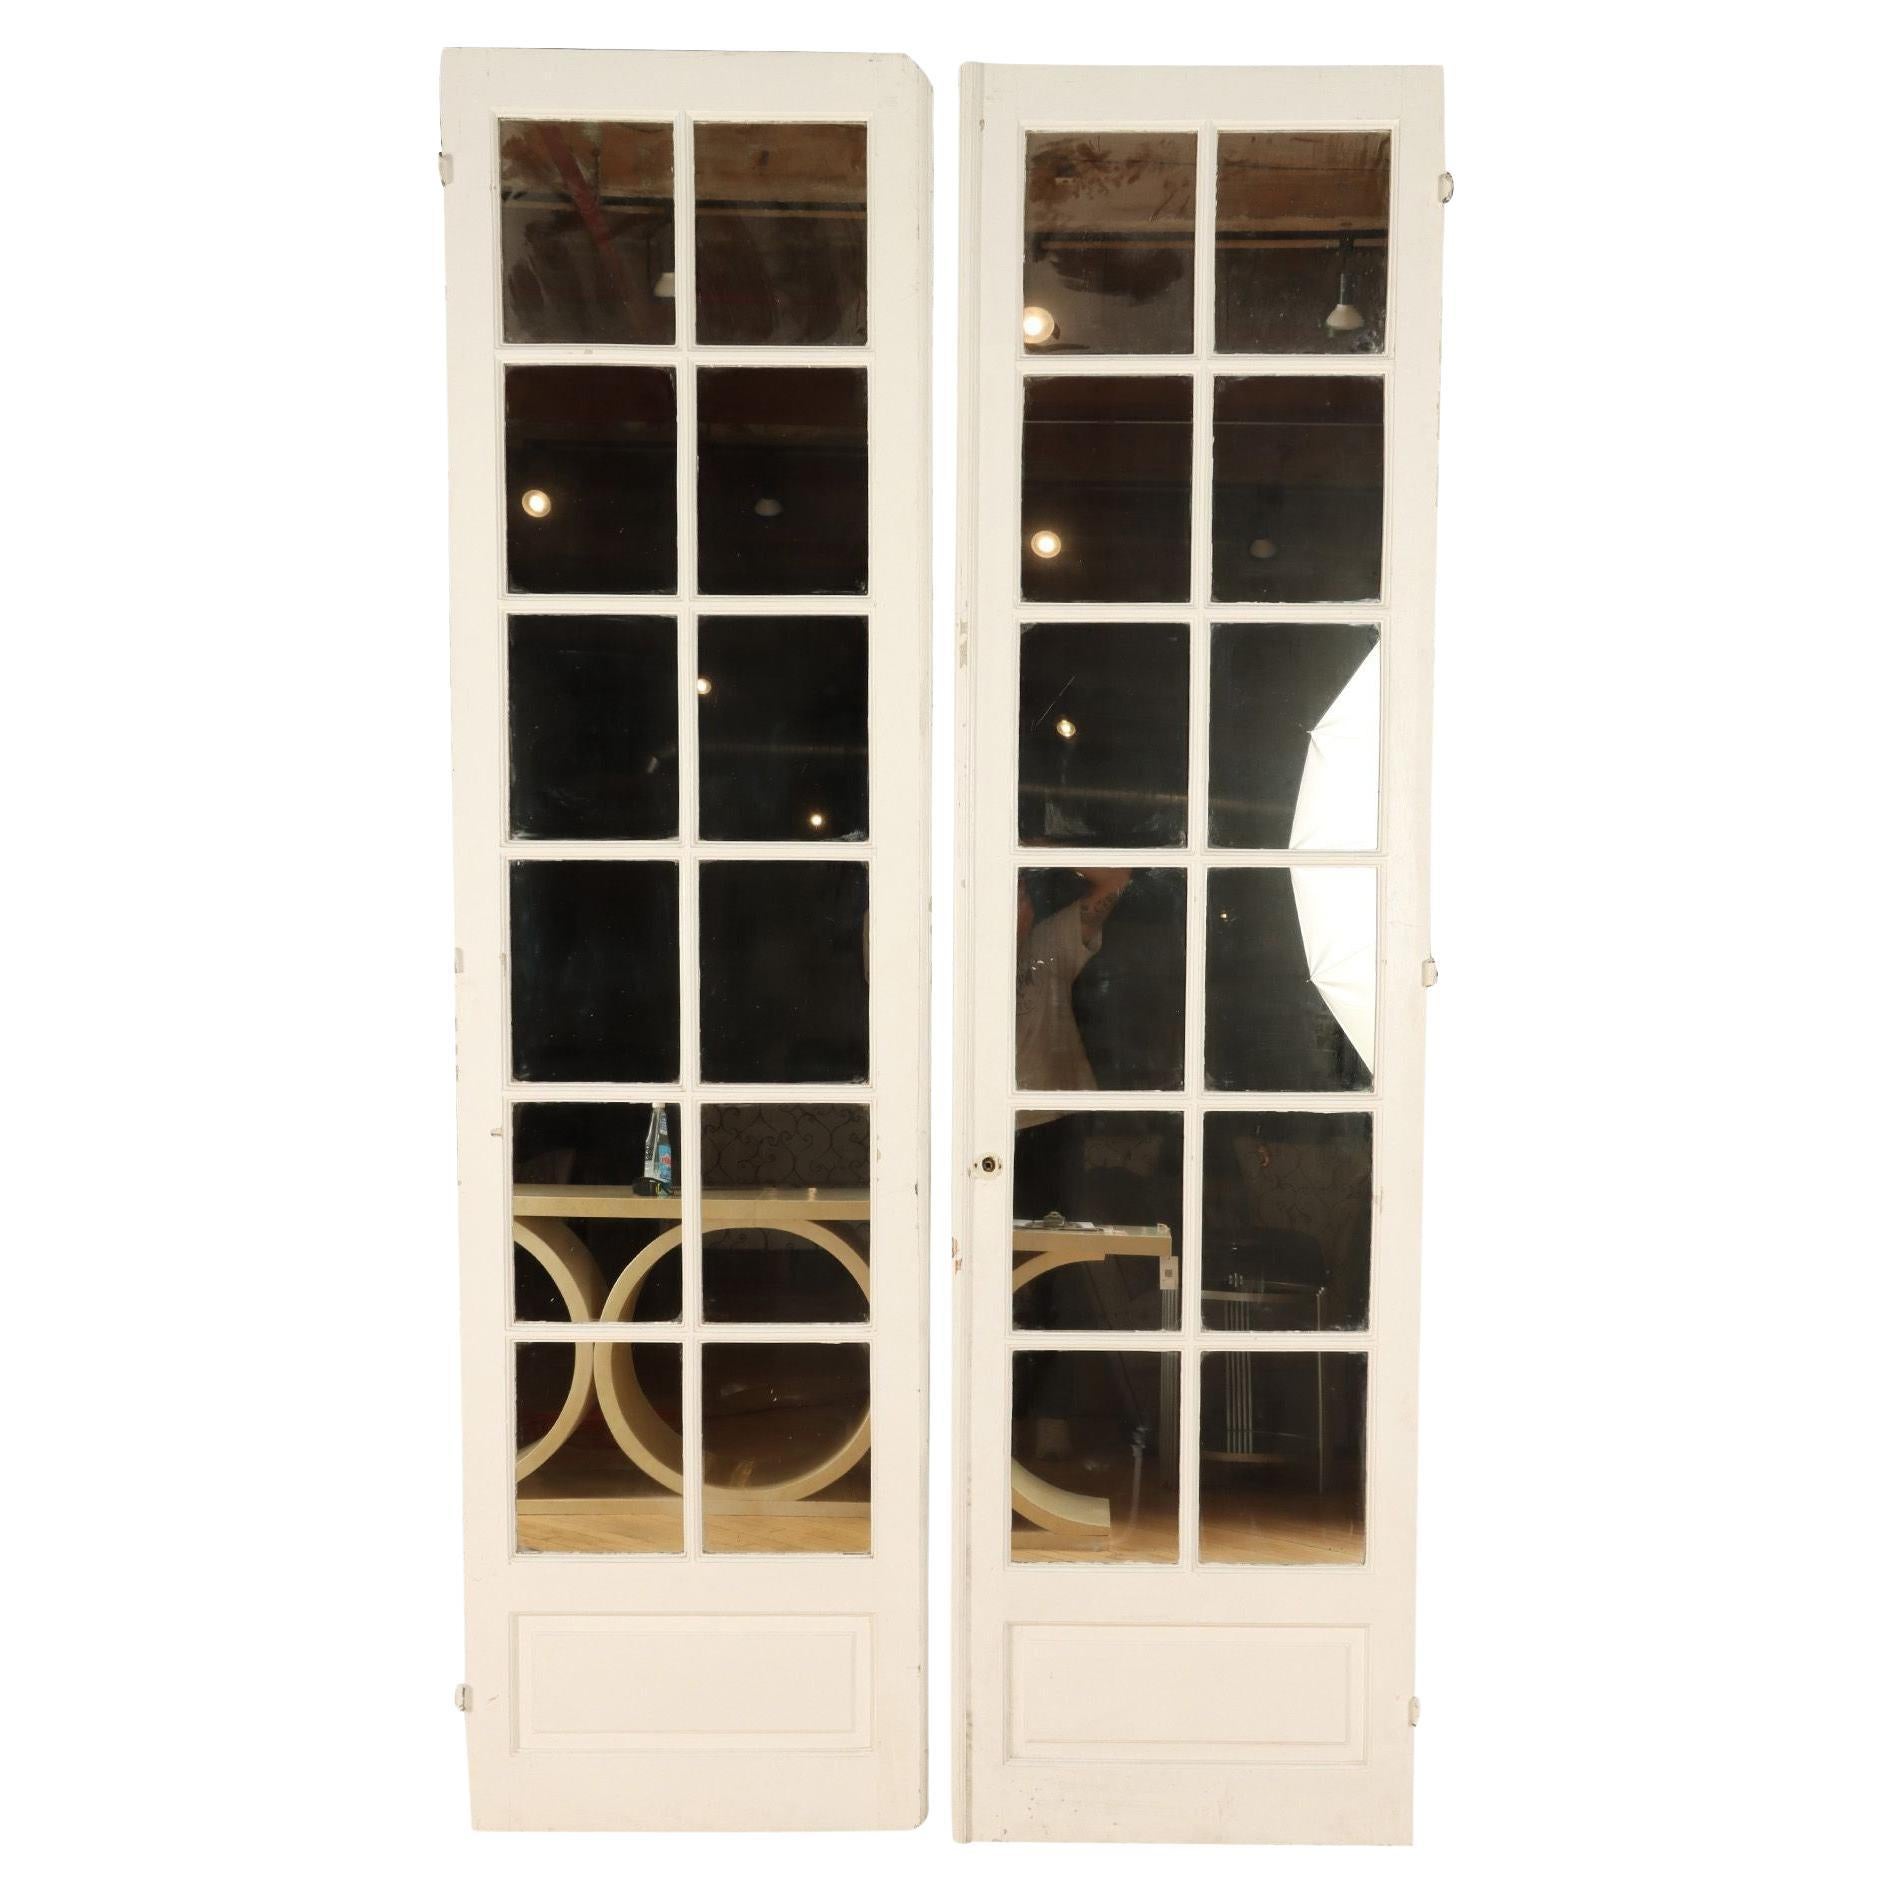 Pair of Painted French Doors C 1900